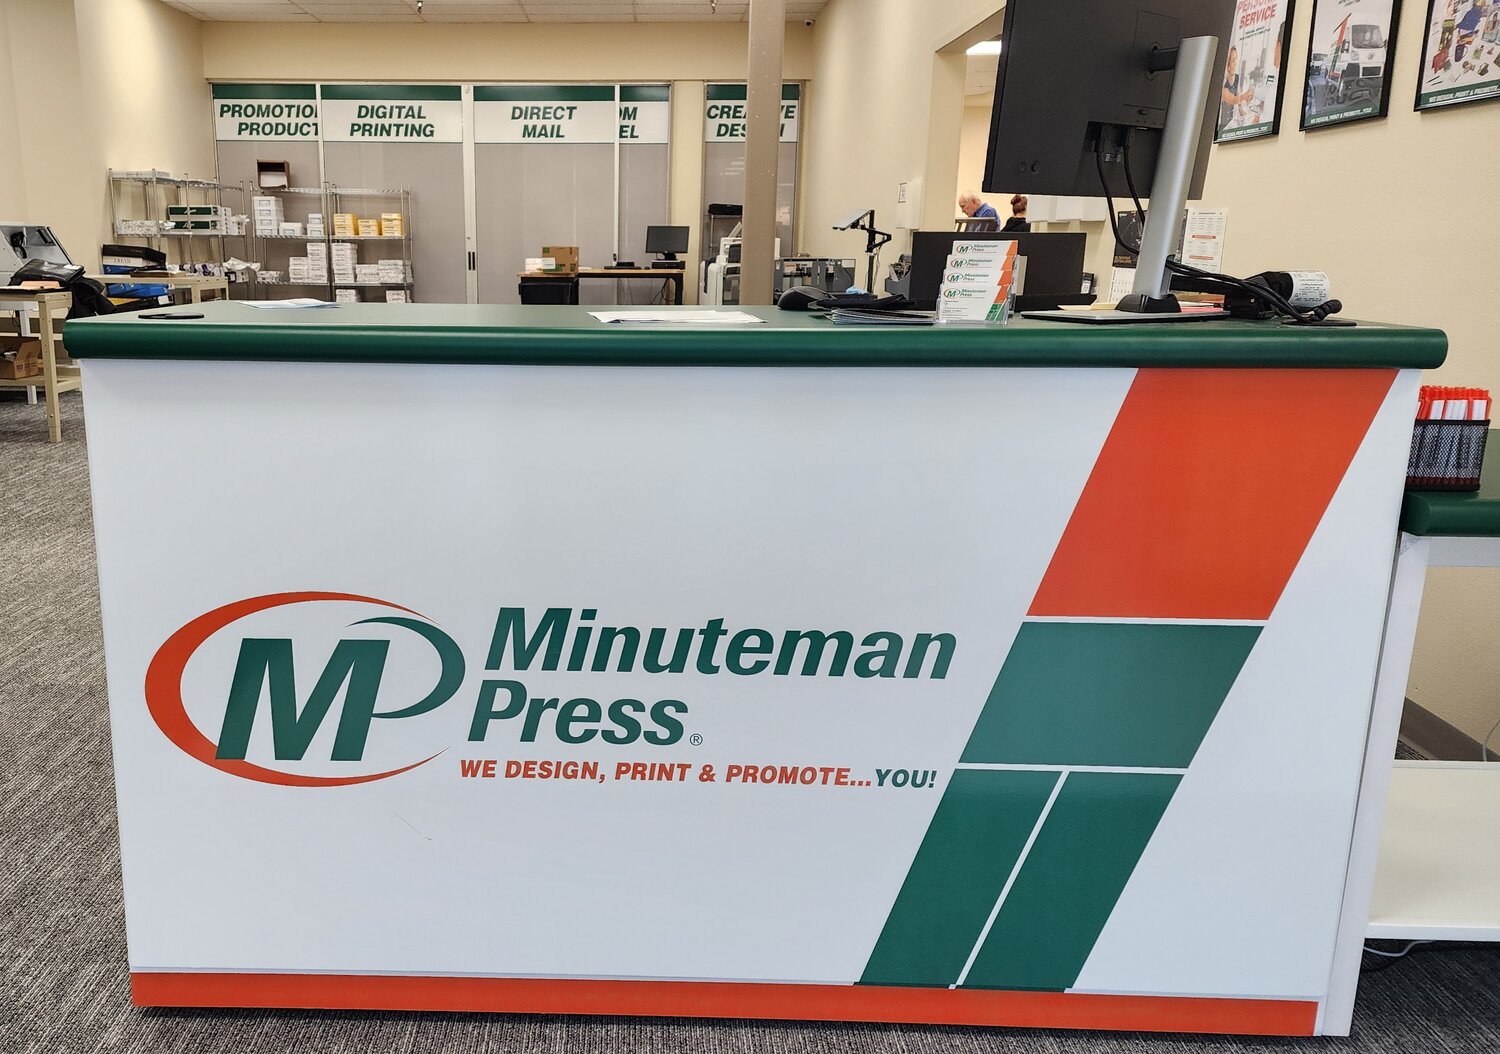 Minuteman Press, one of the newest members of Centralia-Chehalis Chamber of Commerce, will celebrate its opening with a formal ribbon-cutting ceremony on Tuesday, Dec. 12, at 4:30 p.m..